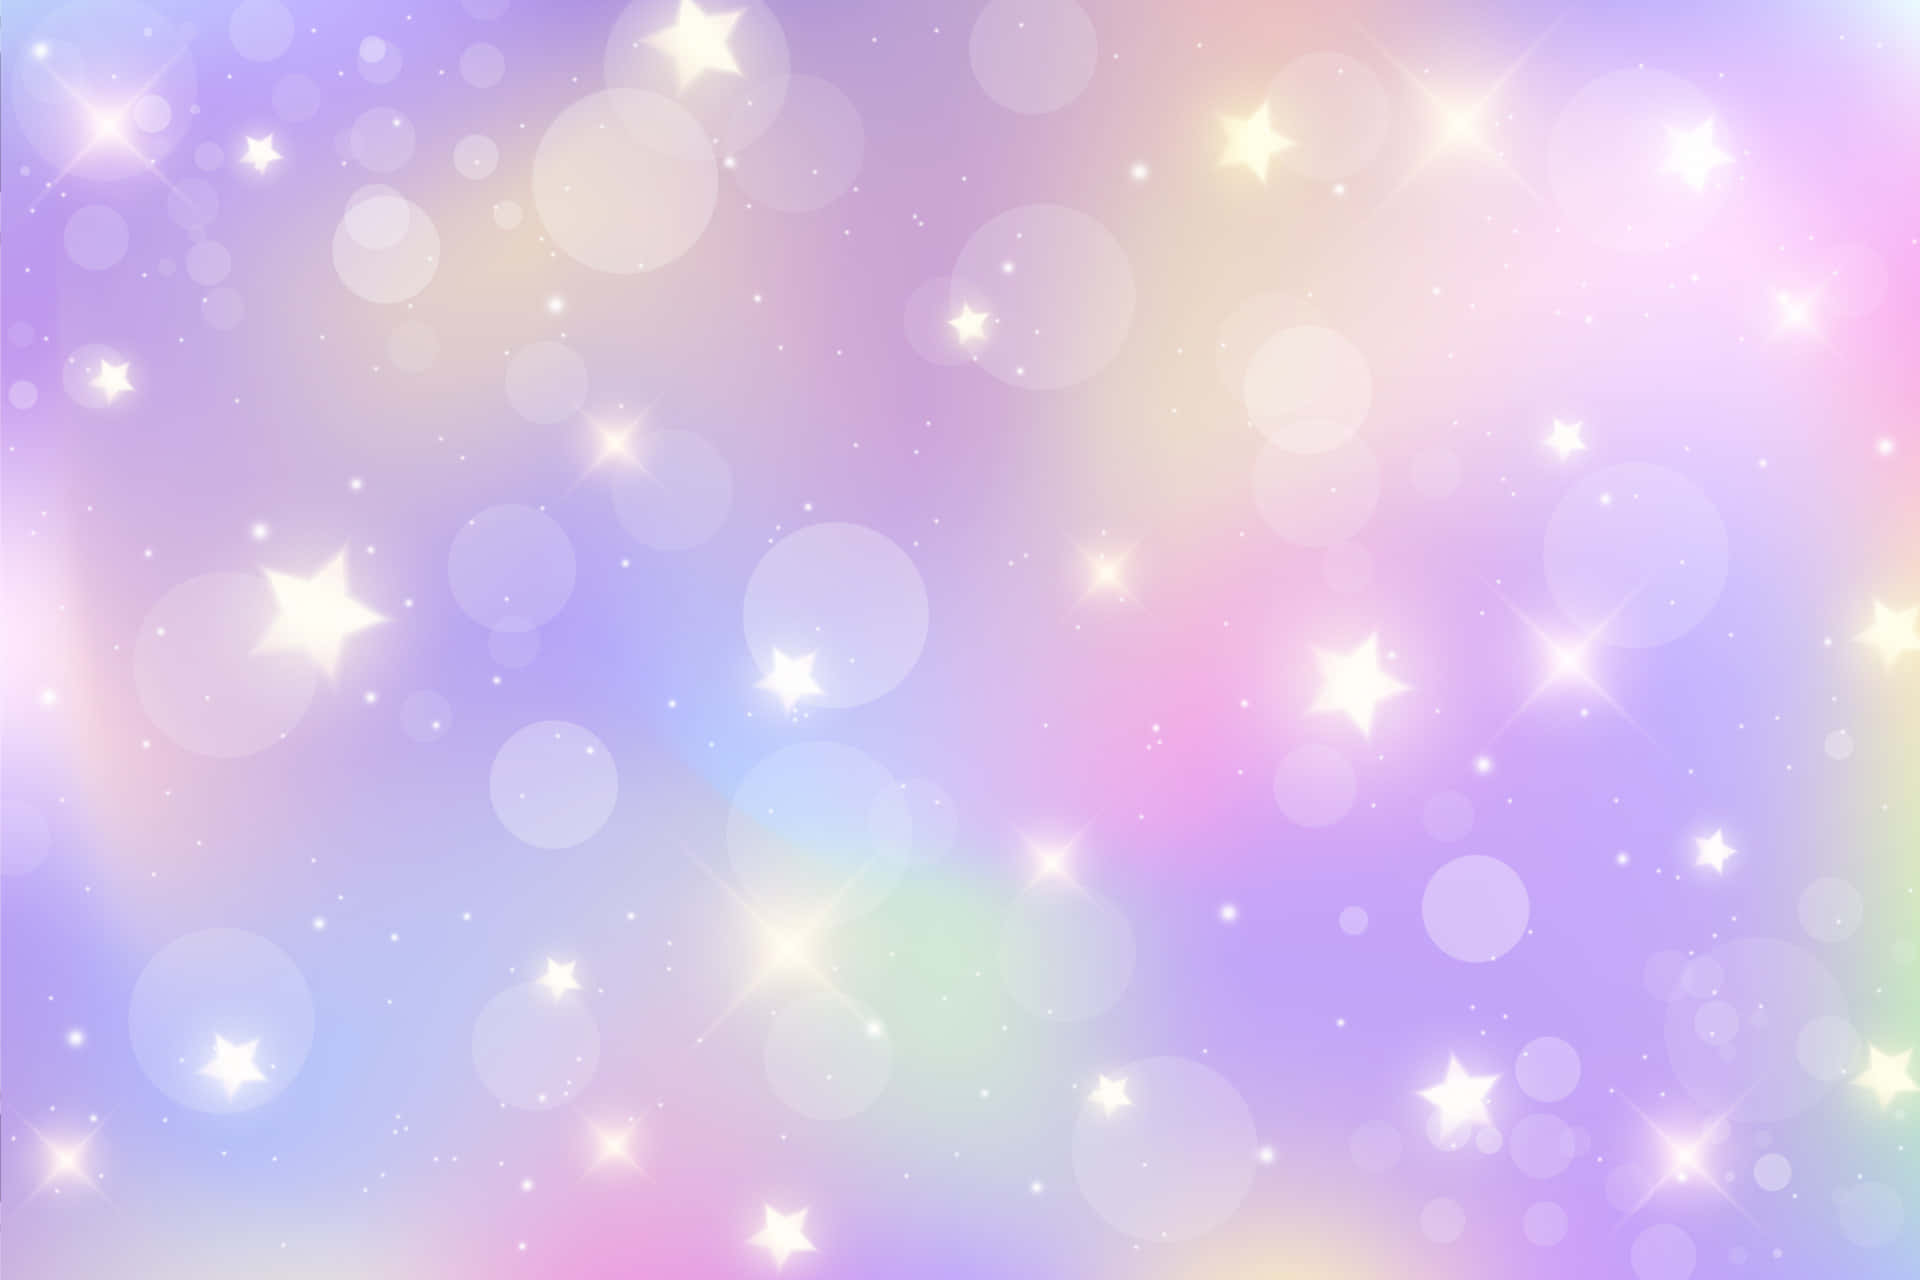 A sparkle of purple within the night sky Wallpaper